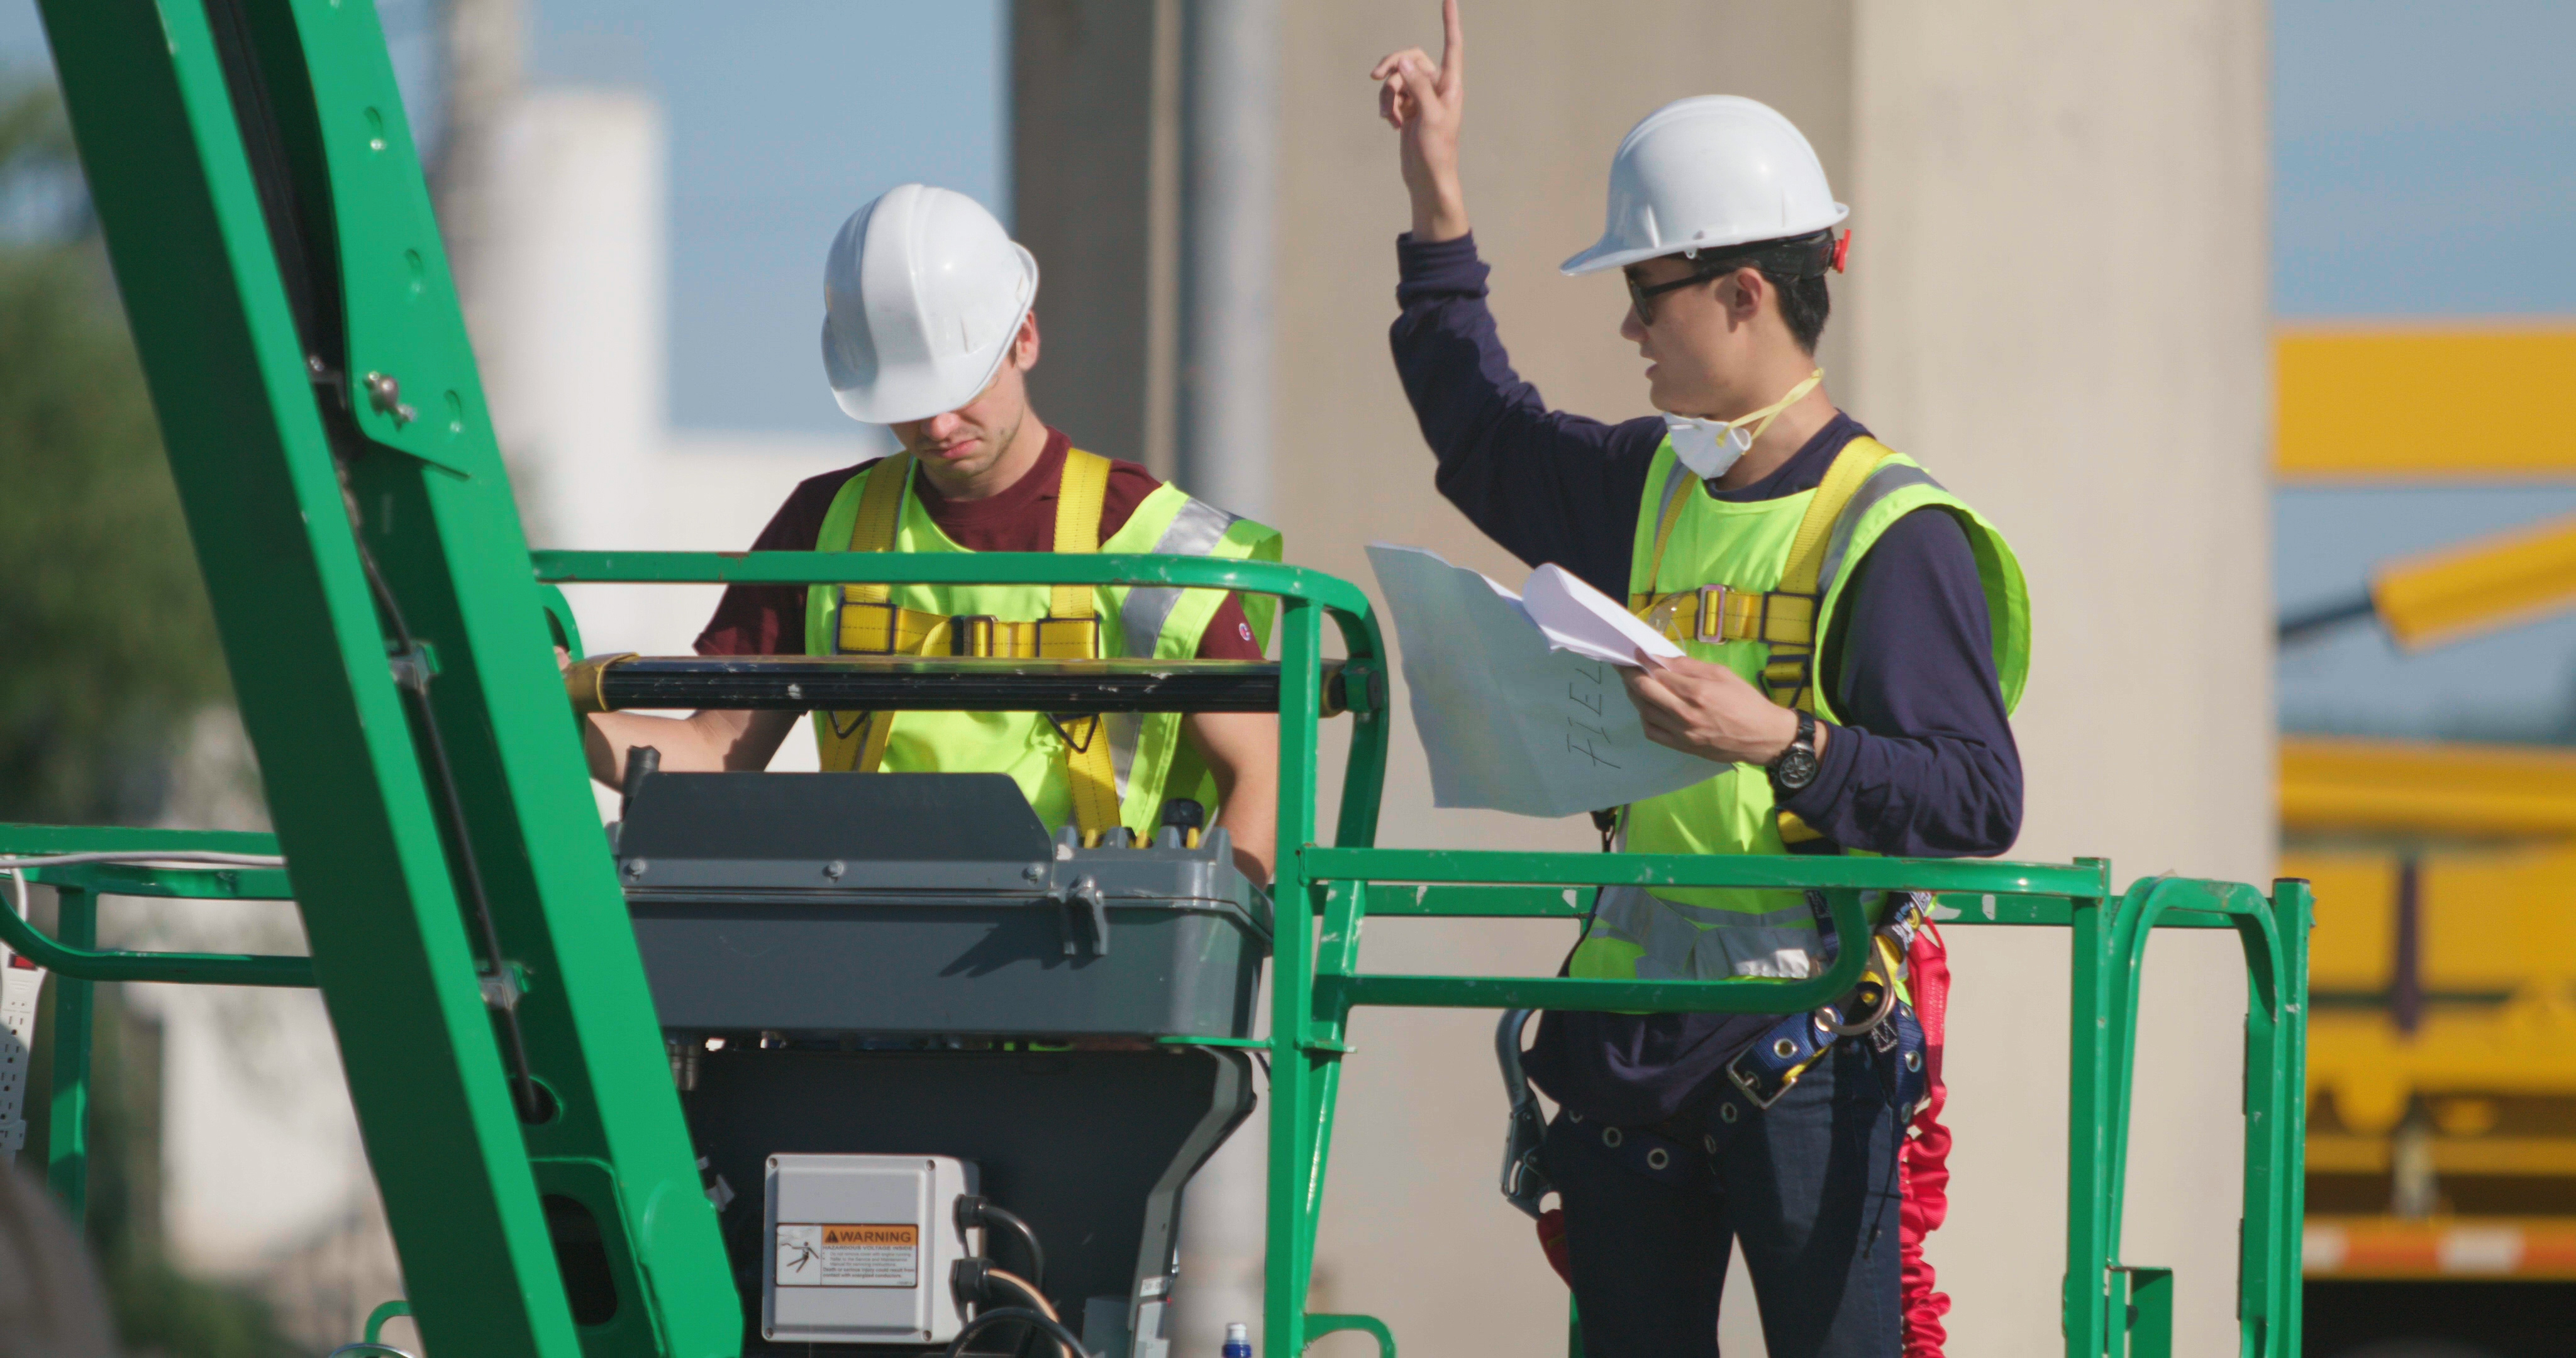 Two men, wearing hard hats and vests, on a construction lift looking at a piece of paper.